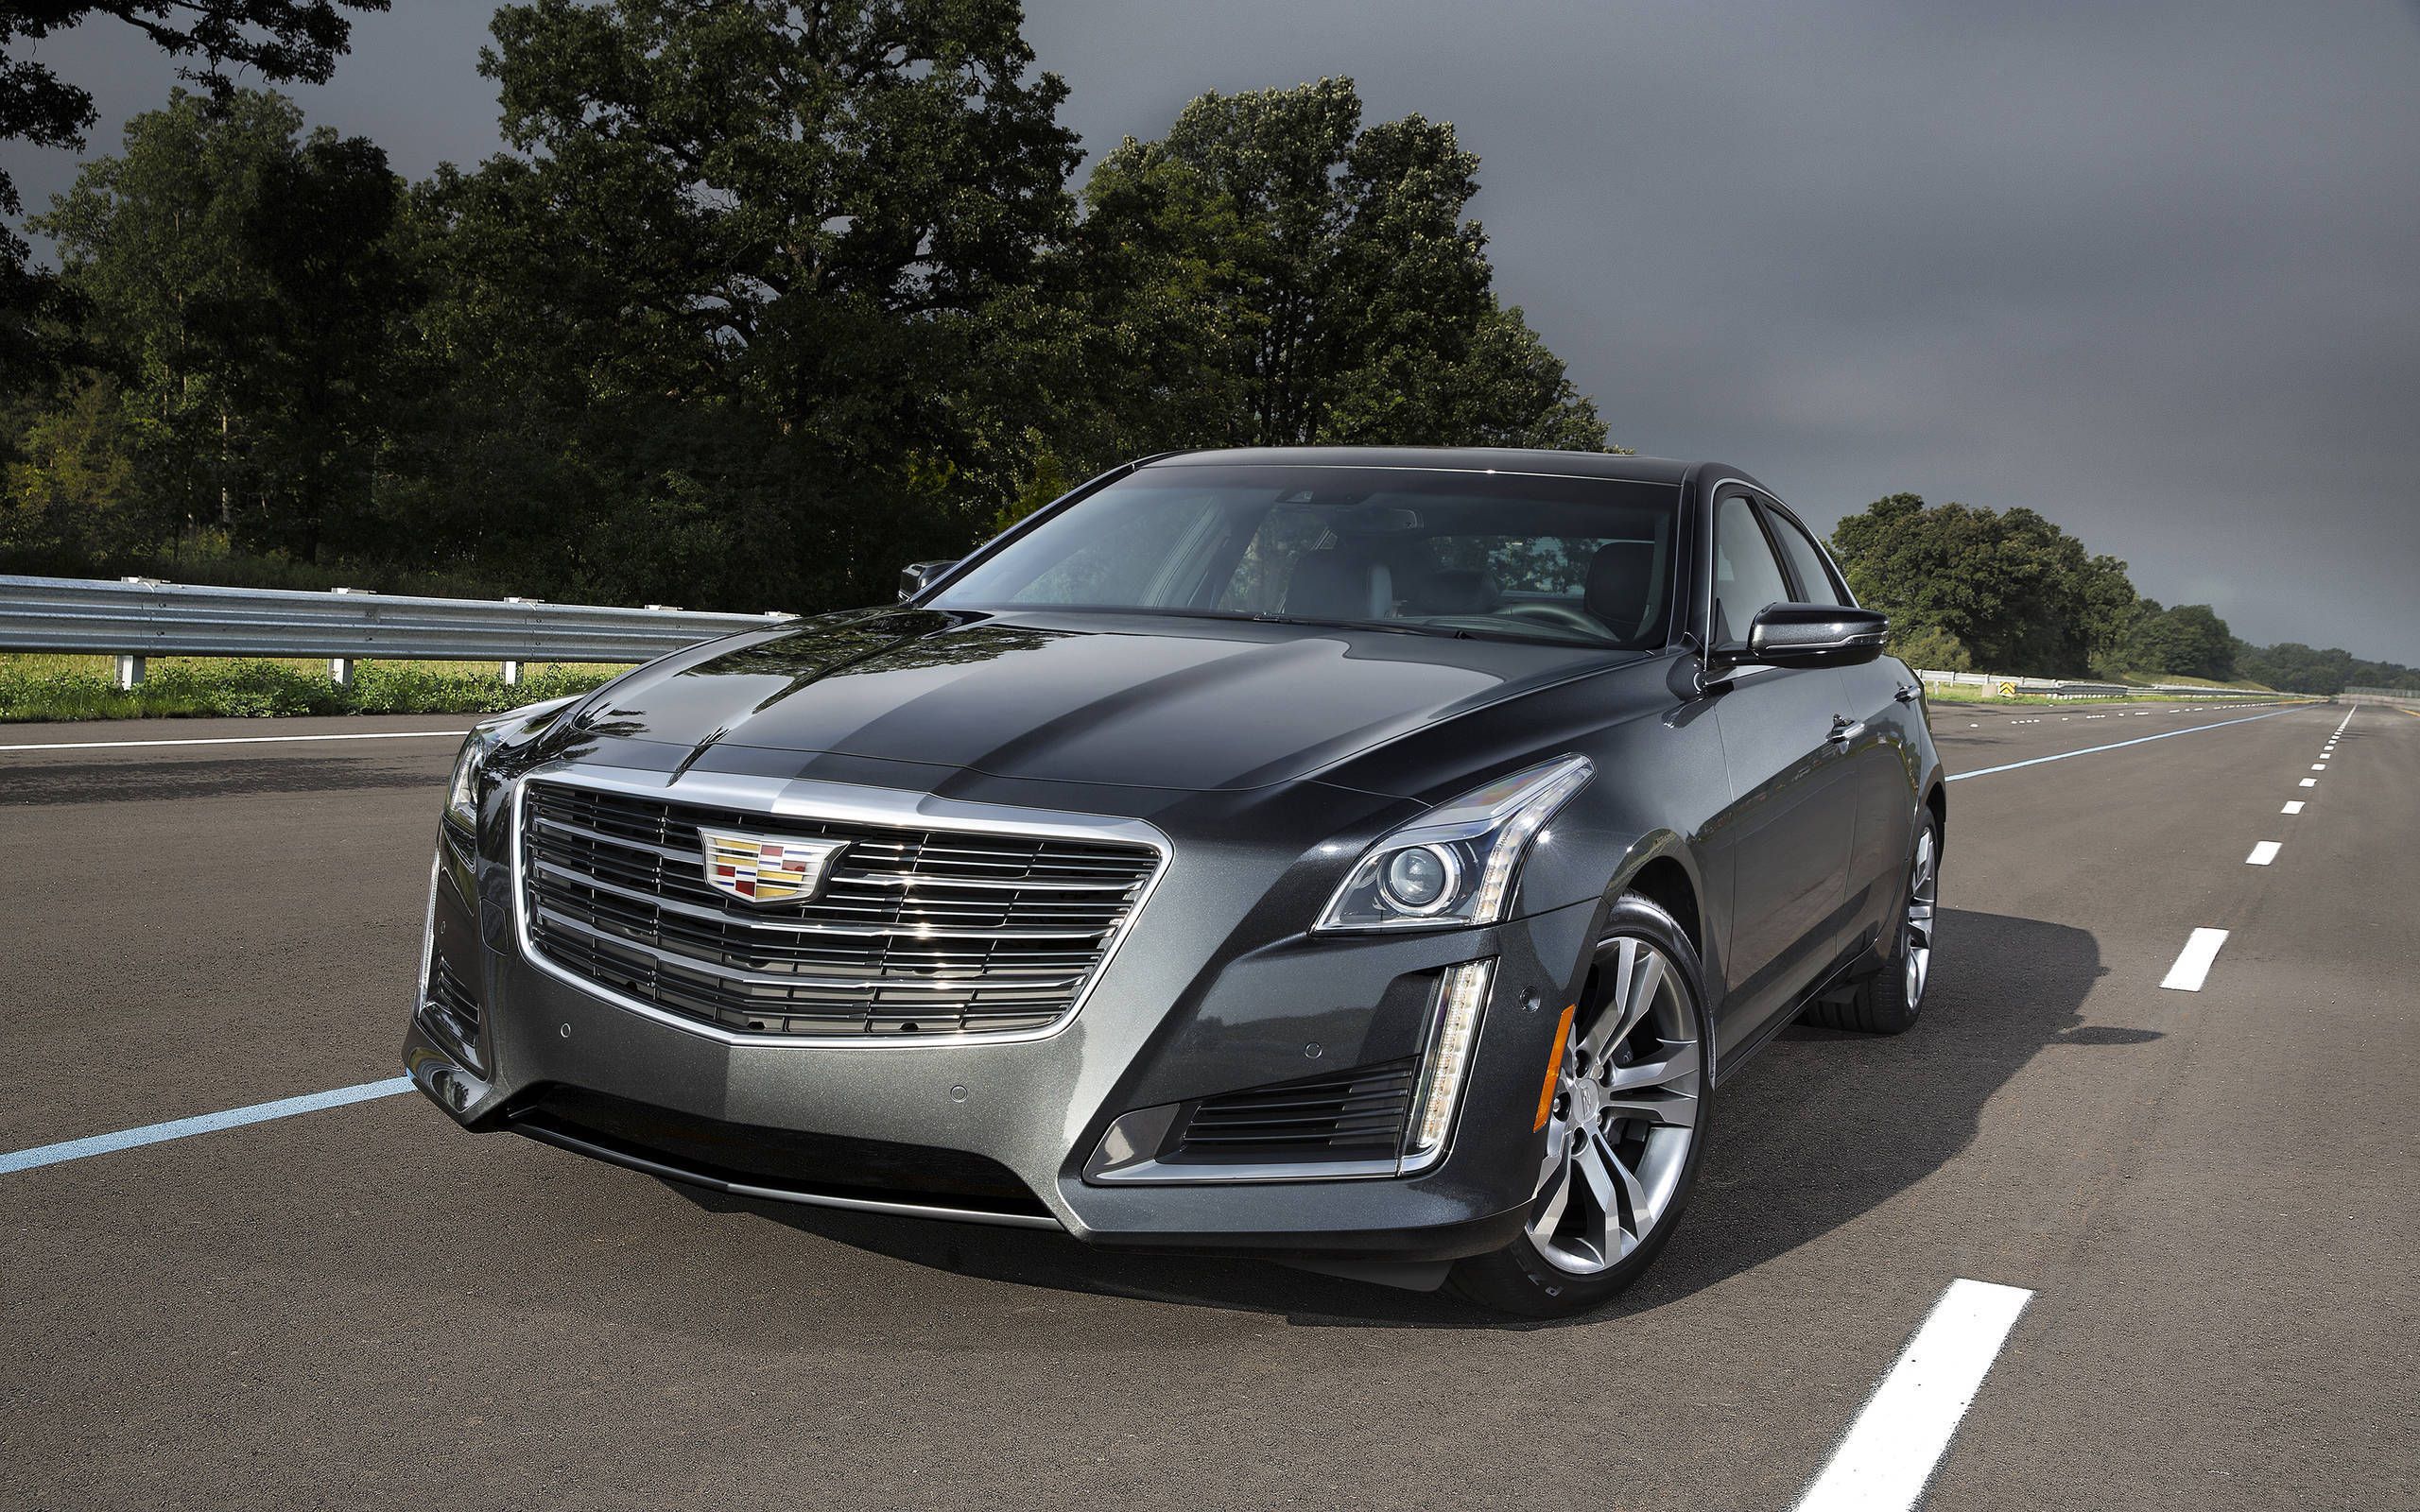 2016 Cadillac CTS AWD review notes: Near perfect, but needs an image upgrade